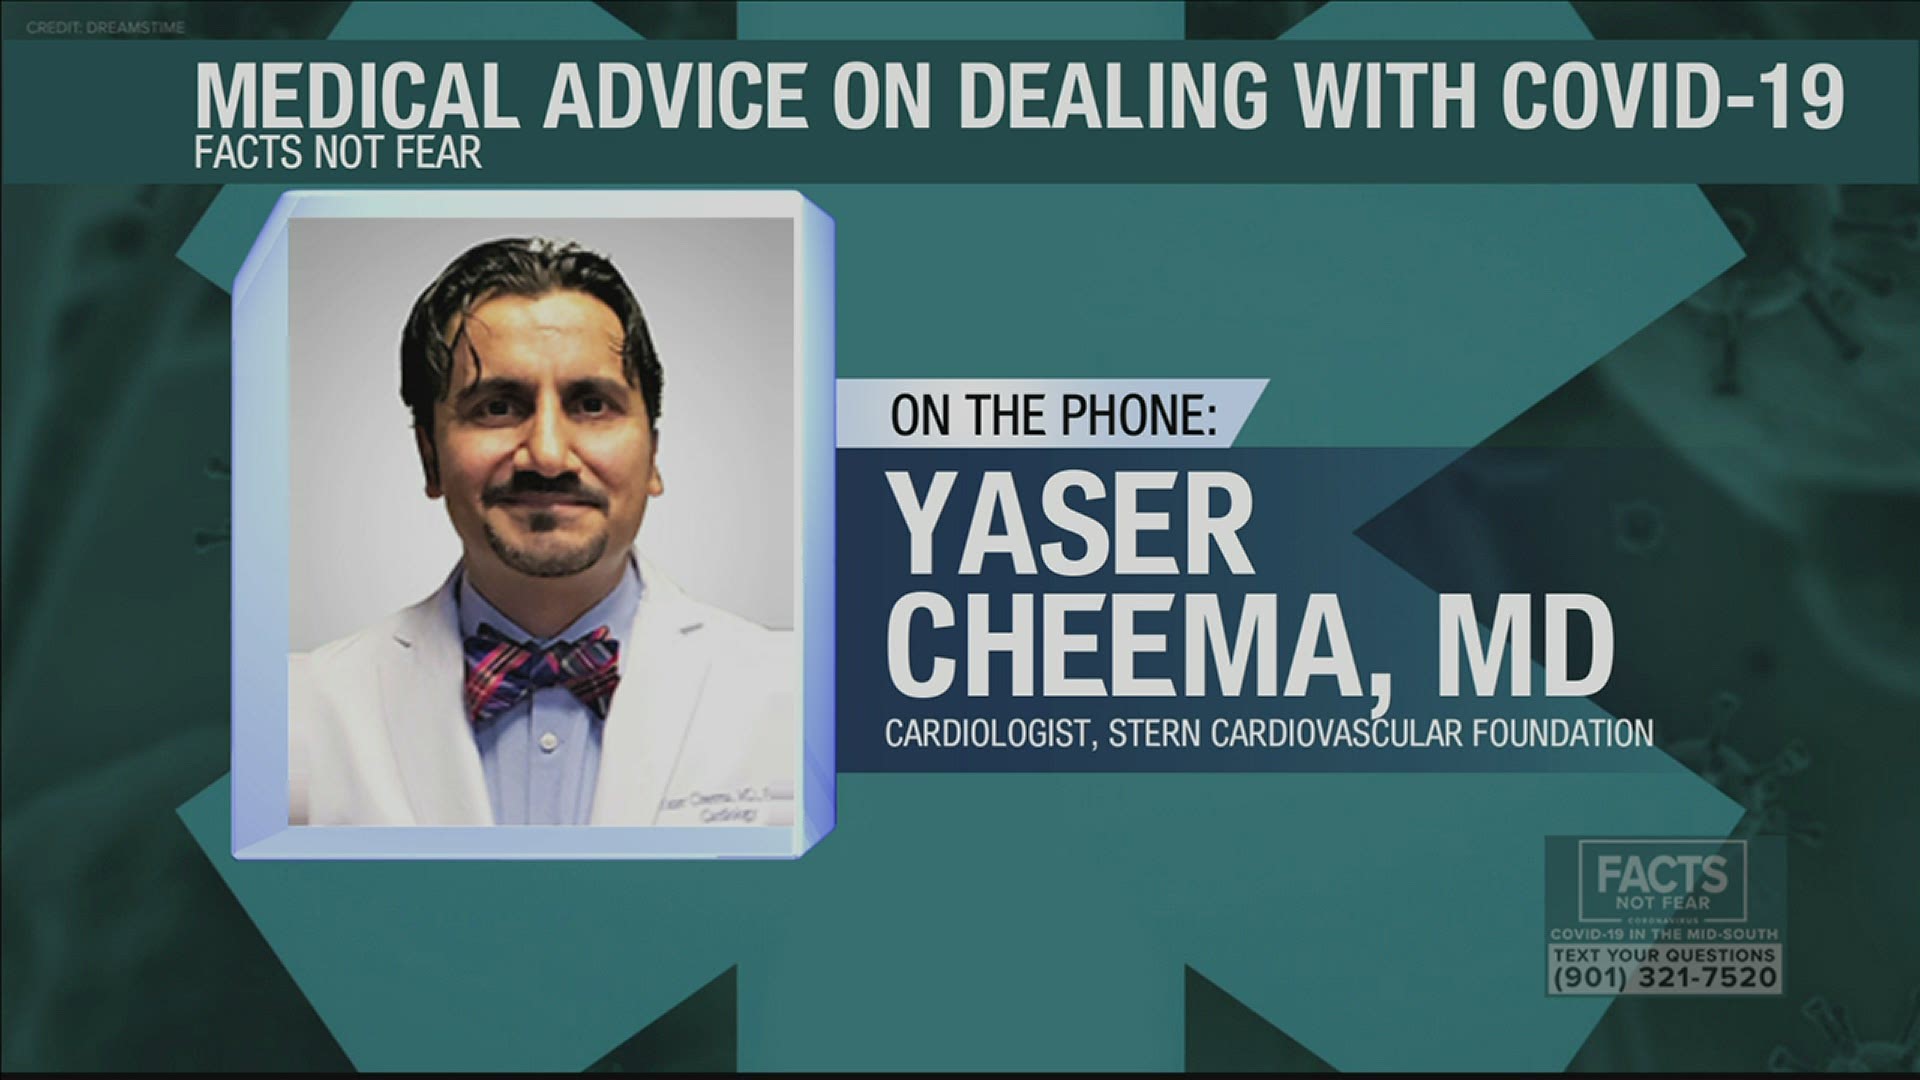 Dr. Yaser Cheema, Medical Advice on Dealing with COVID-19